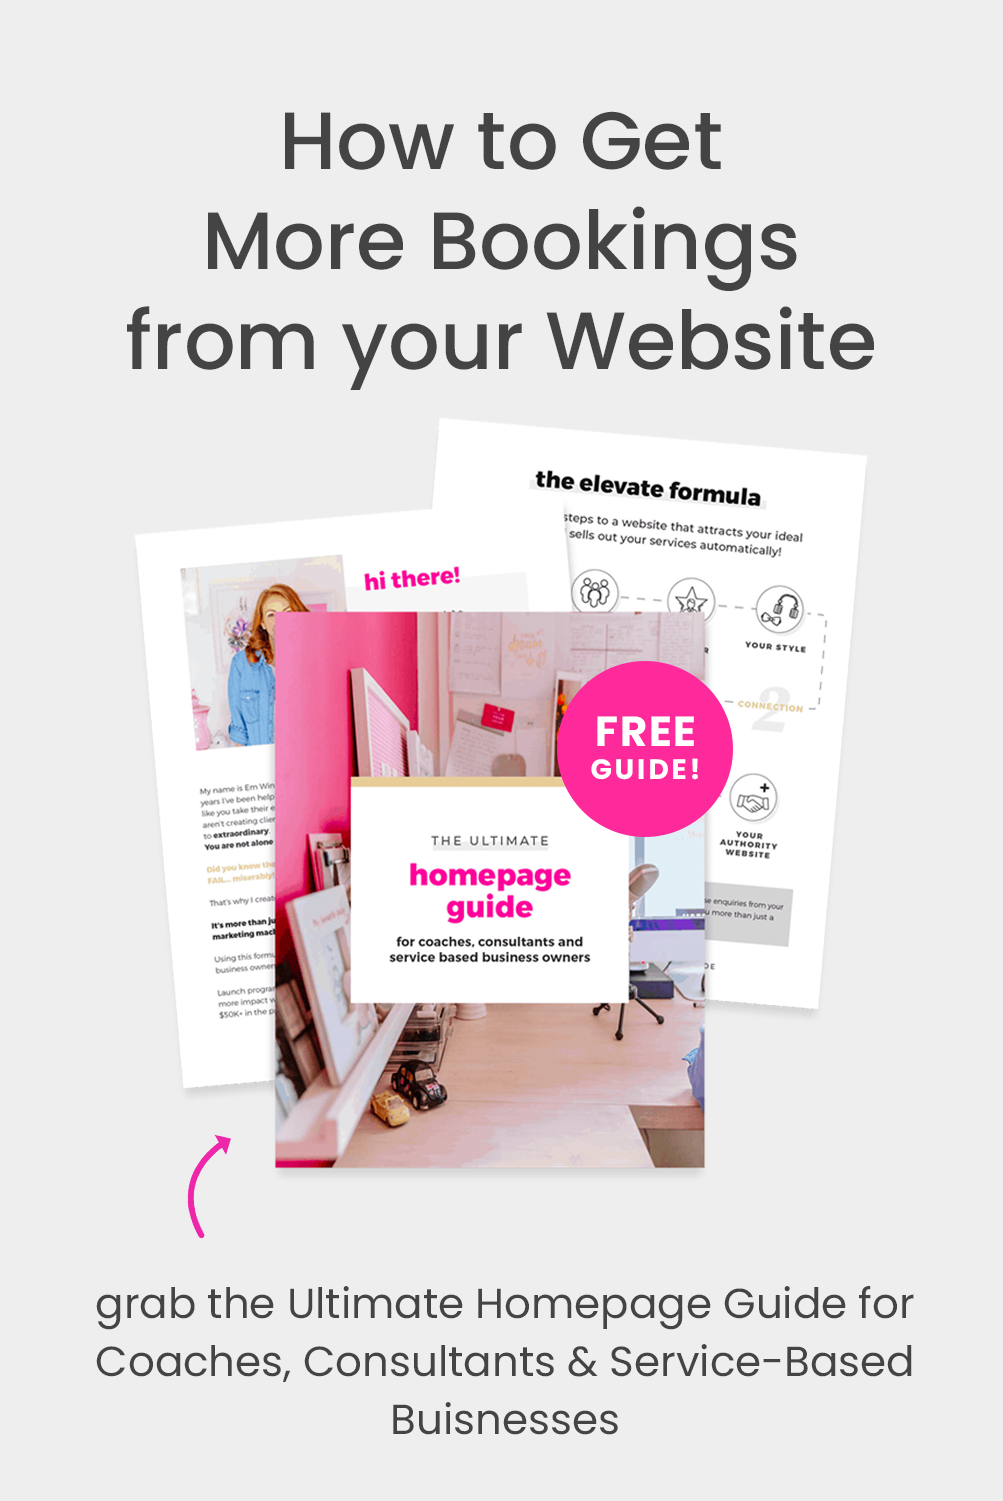 The Ultimate Homepage for Coaches & Consultants - Optimise your website for clicks and conversions